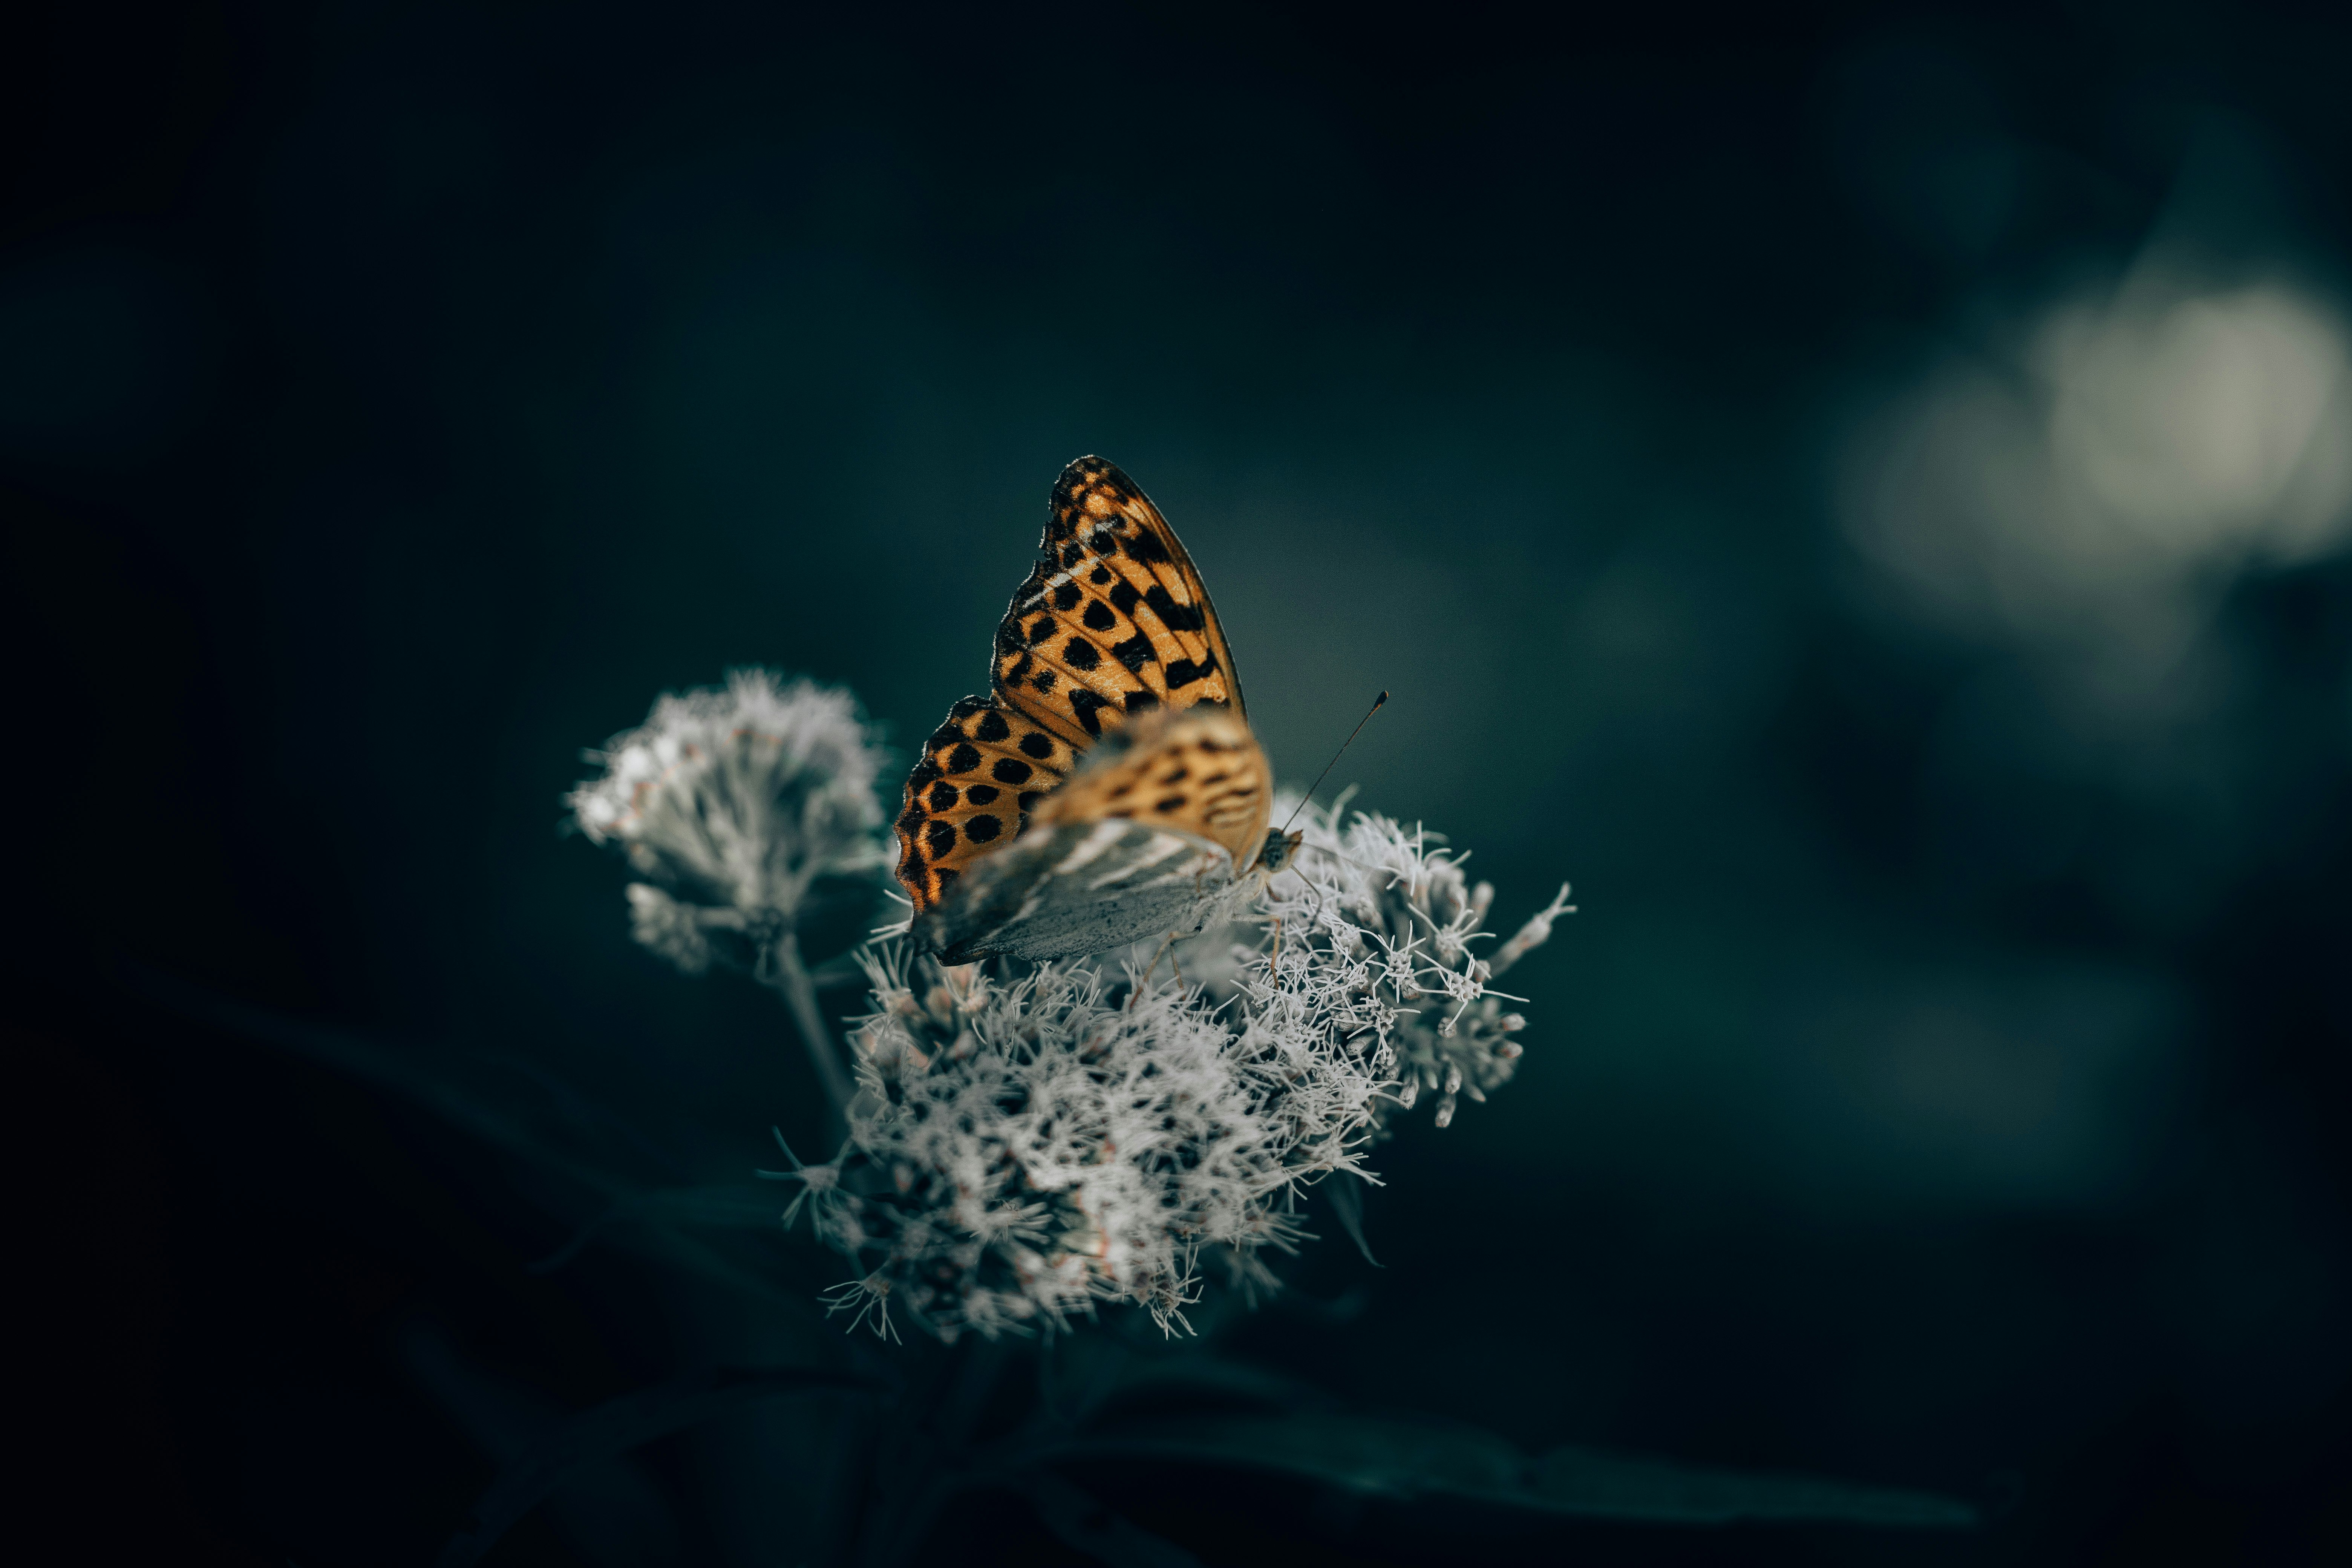 brown and black butterfly perched on white flower in selective focus photography